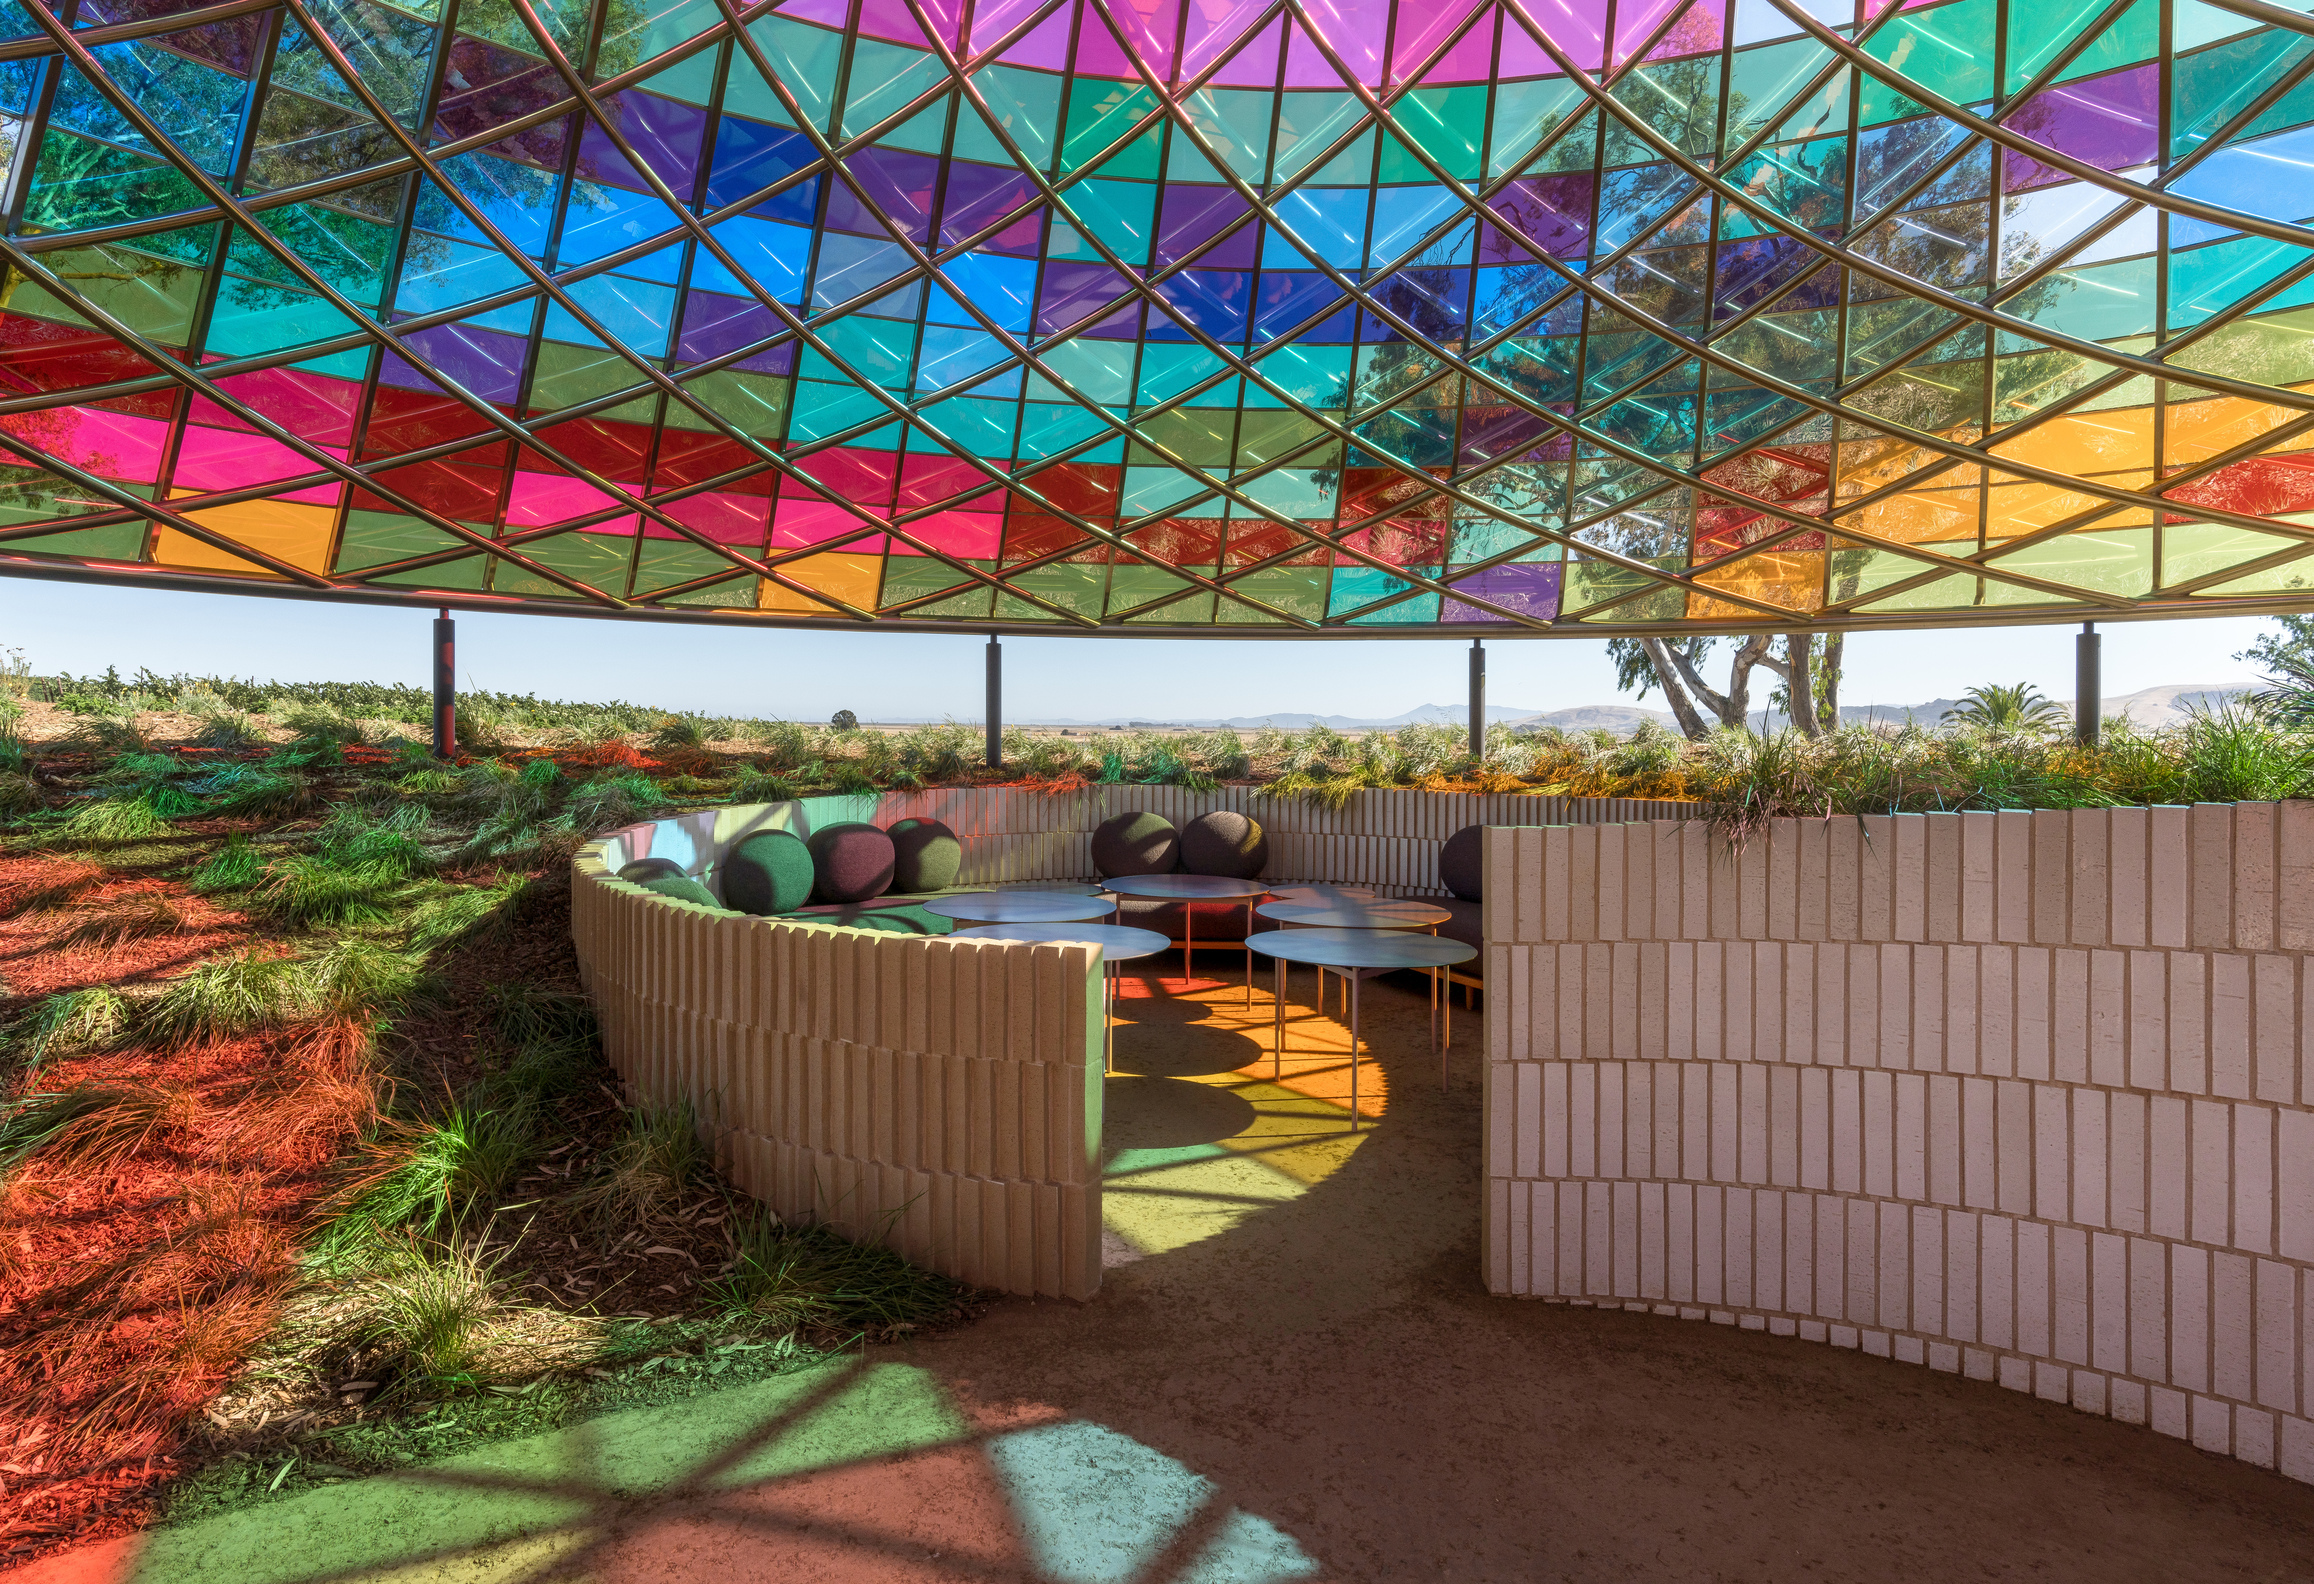 EMBRACE COLORFUL VIBES：Vertical Panorama Pavilion 為城市活力上色 - 萬花筒藝術品酒亭